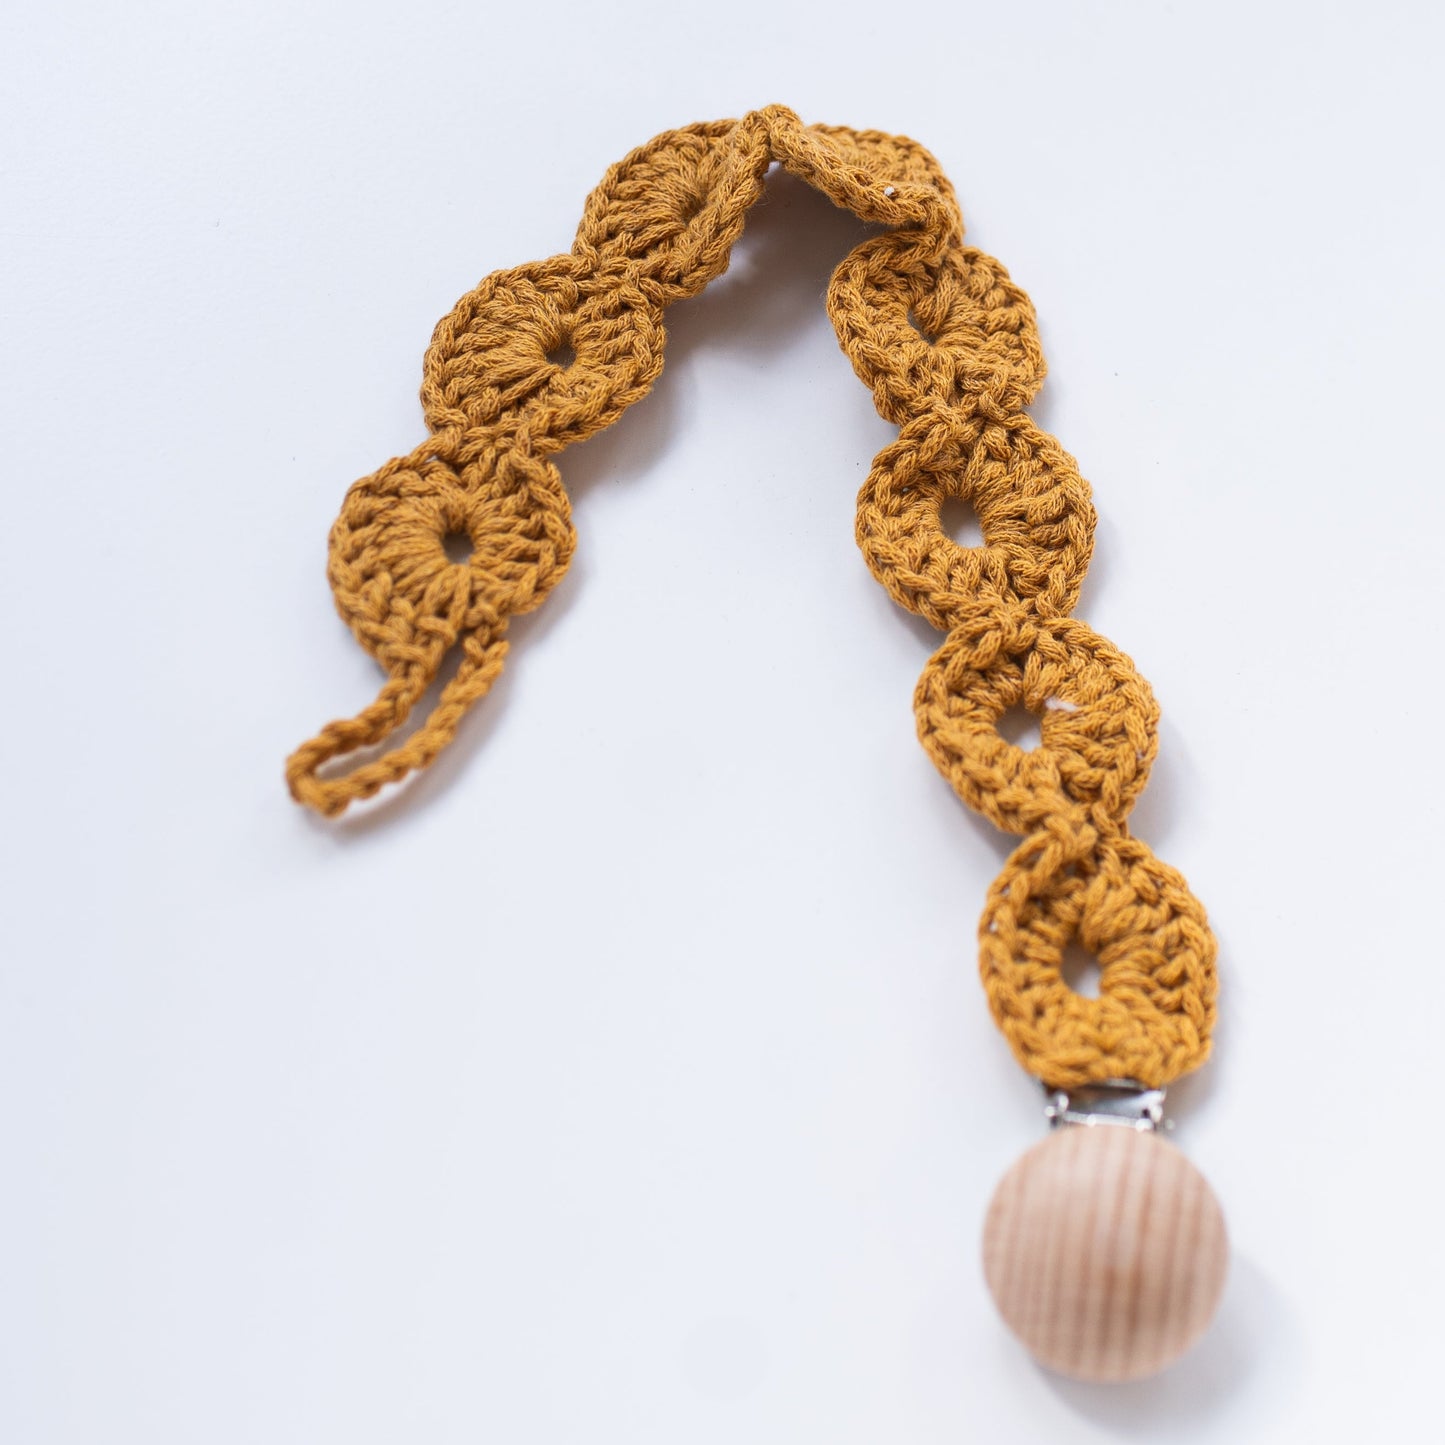 Crocheted Pacifier Clip